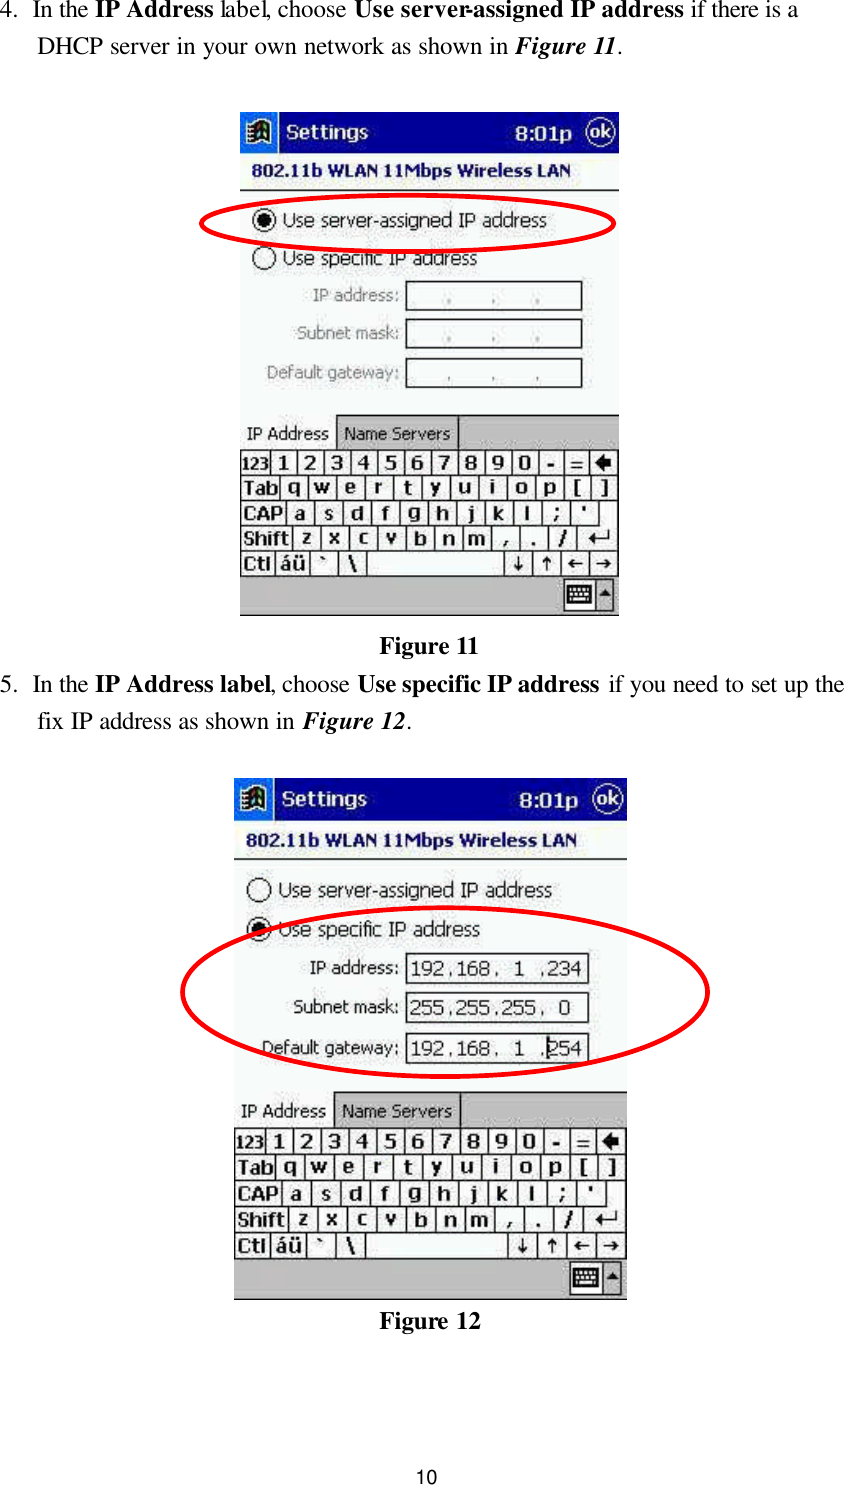  10 4. In the IP Address label, choose Use server-assigned IP address if there is a DHCP server in your own network as shown in Figure 11.   Figure 11 5. In the IP Address label, choose Use specific IP address if you need to set up the fix IP address as shown in Figure 12.   Figure 12   